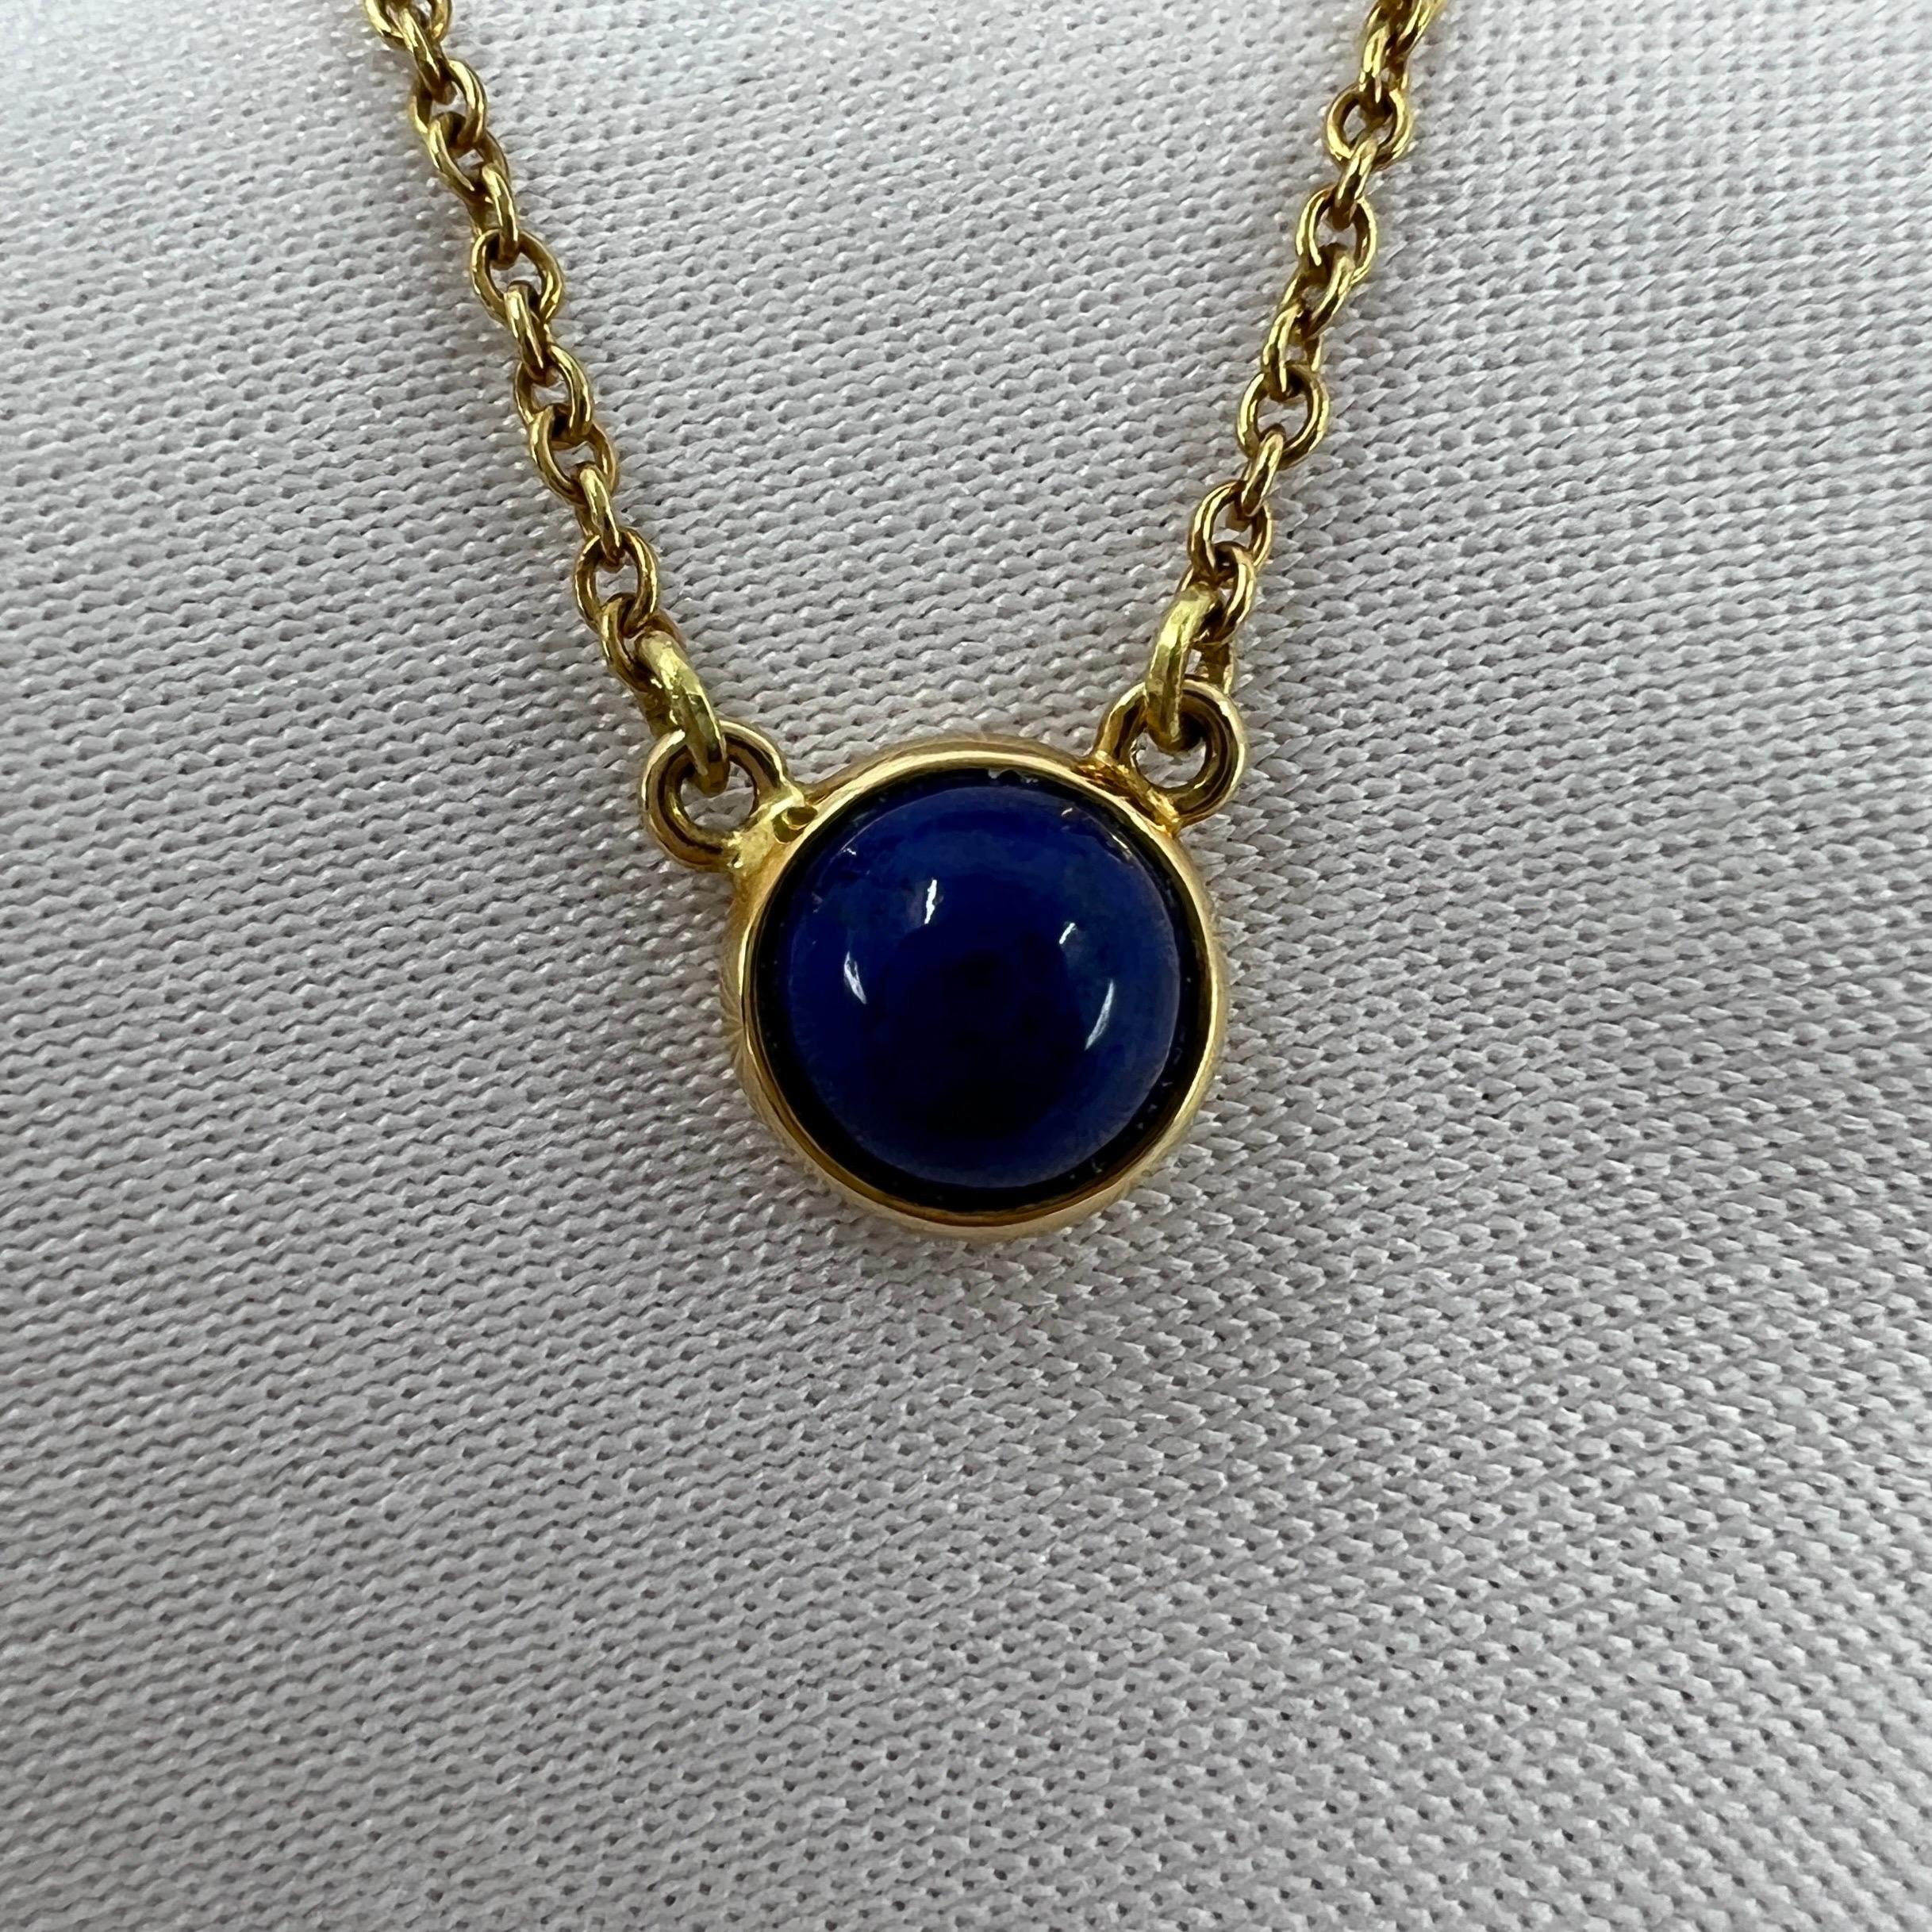 Rare Vintage Lapis Lazuli Tiffany & Co. Elsa Peretti By The Yard 18k Yellow Gold Necklace.

A beautiful and rare 18k yellow gold pendant necklace set with a stunning blue lapis lazuli round cabochon measuring approx. 6mm.

Fine jewellery houses like